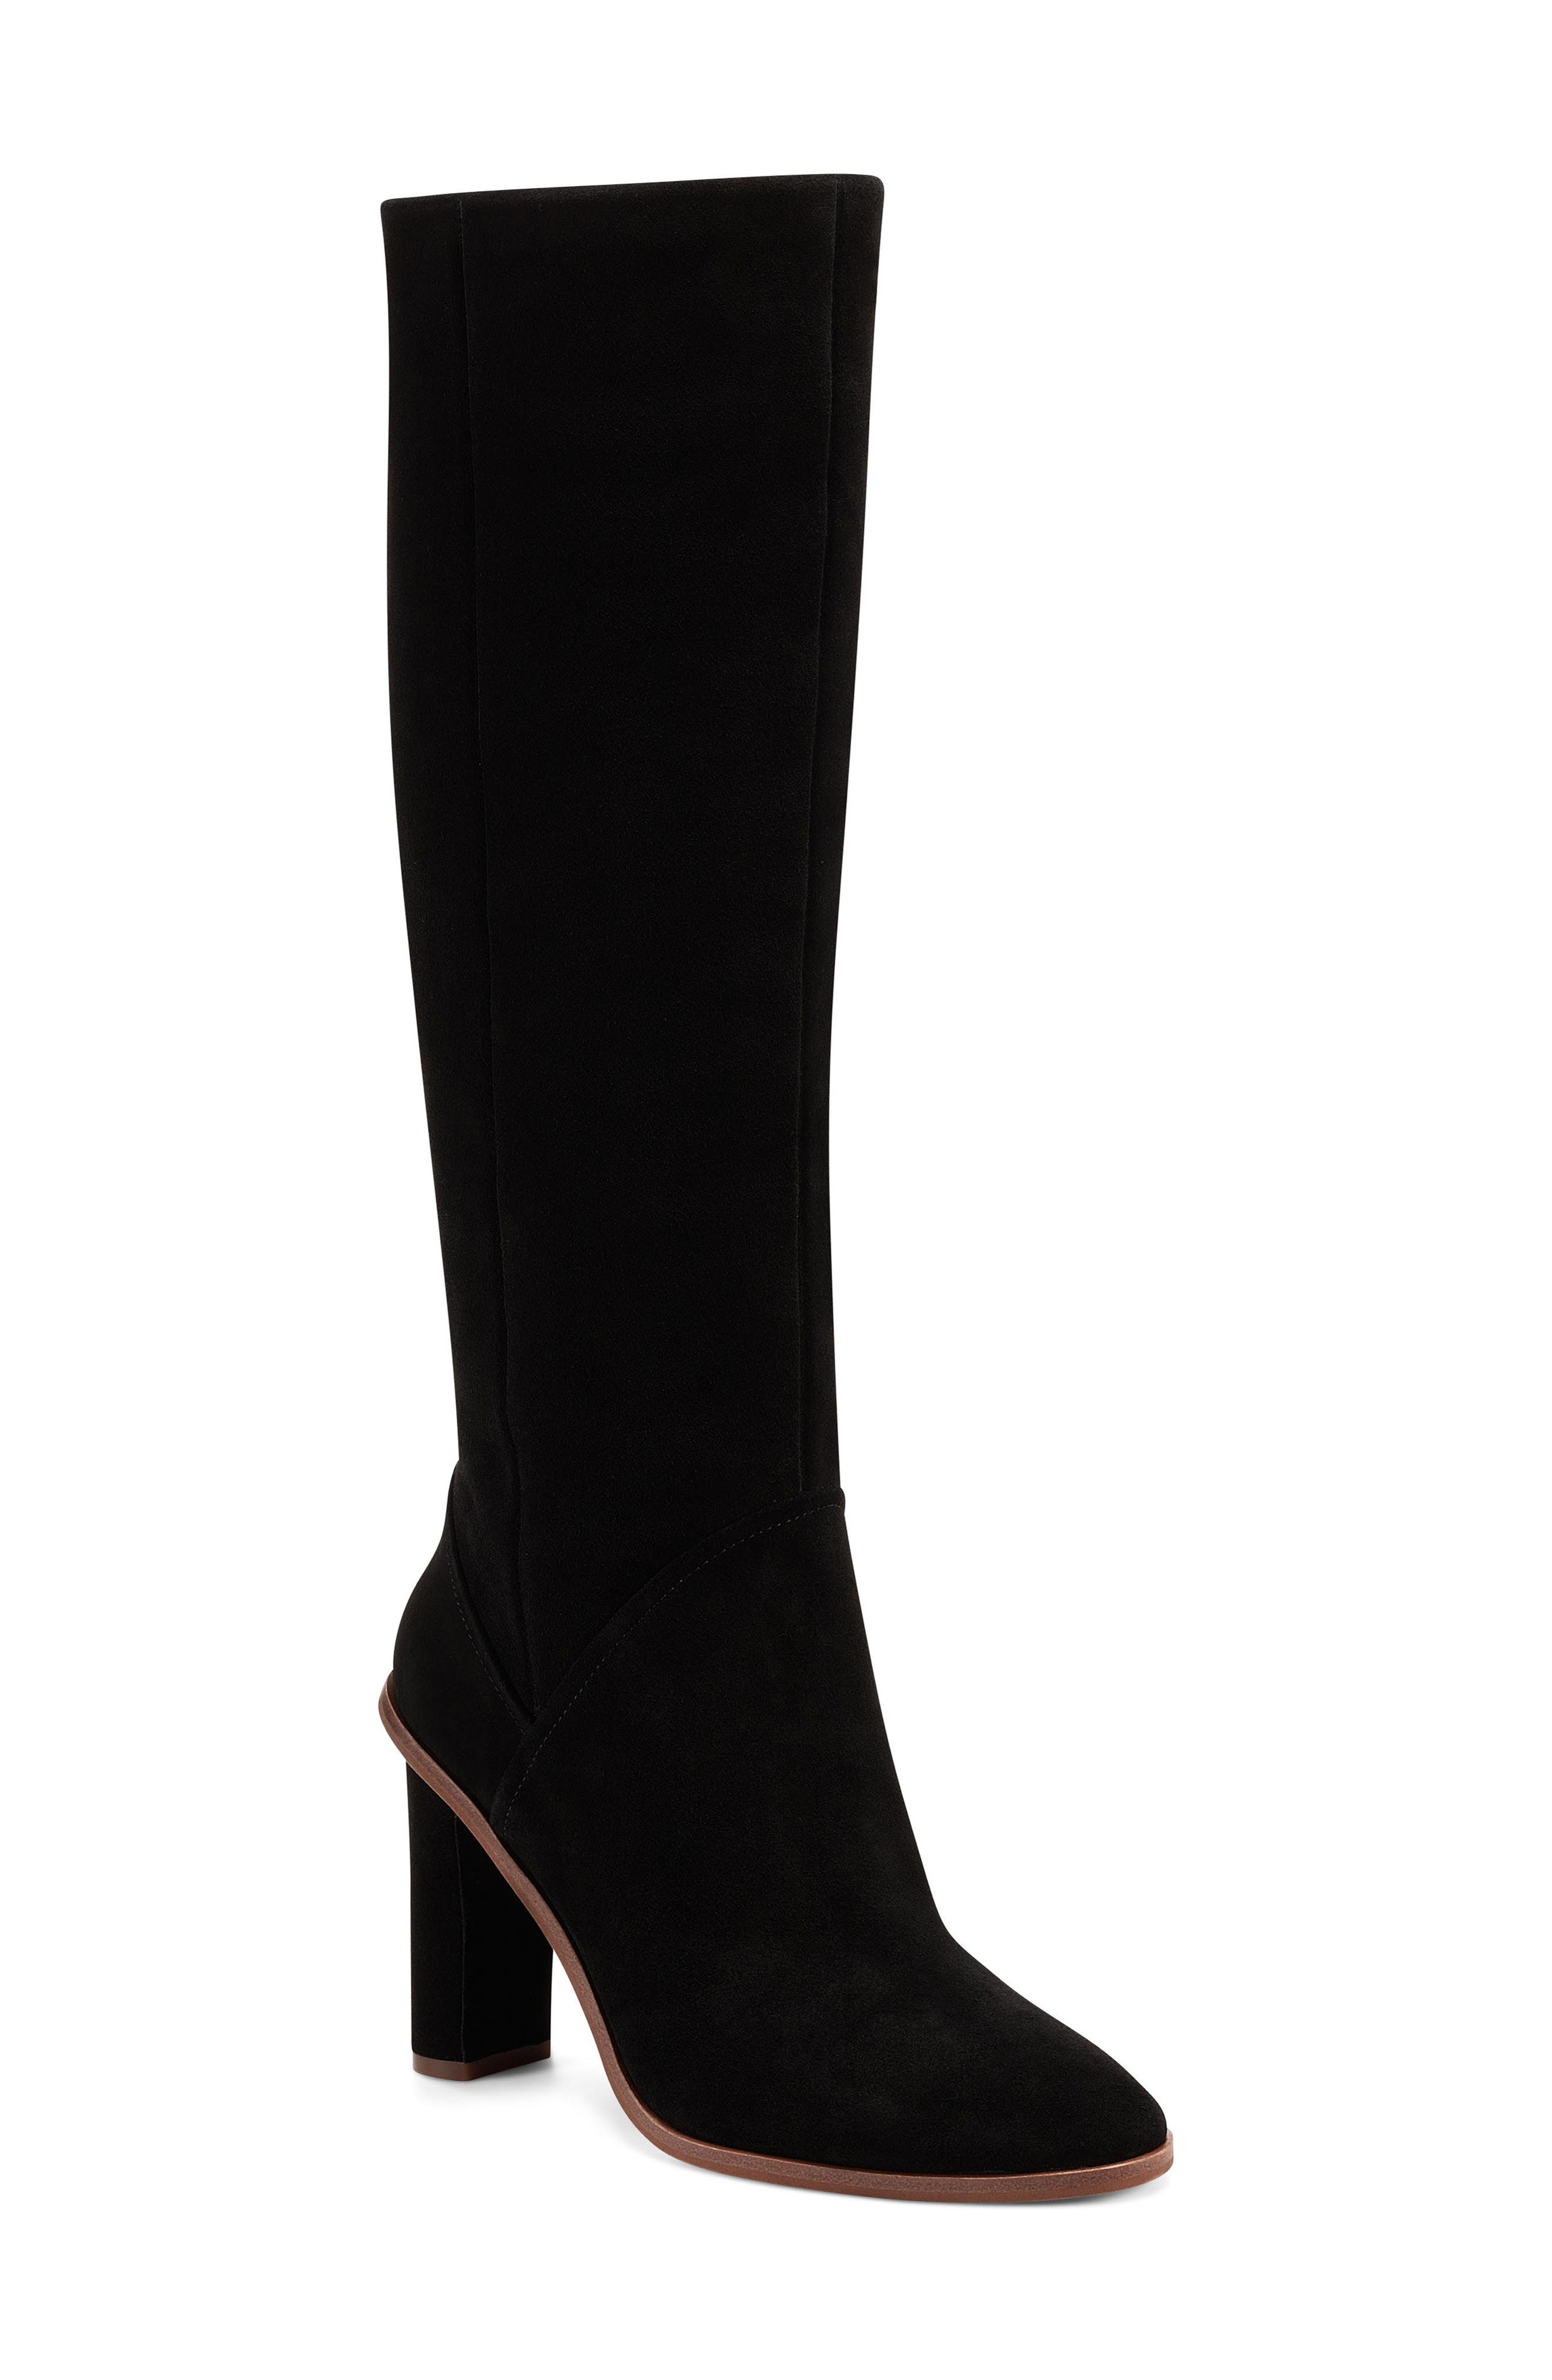 UPC 191707154858 product image for Vince Camuto Phranzie Knee High Boot in Black at Nordstrom, Size 7 | upcitemdb.com